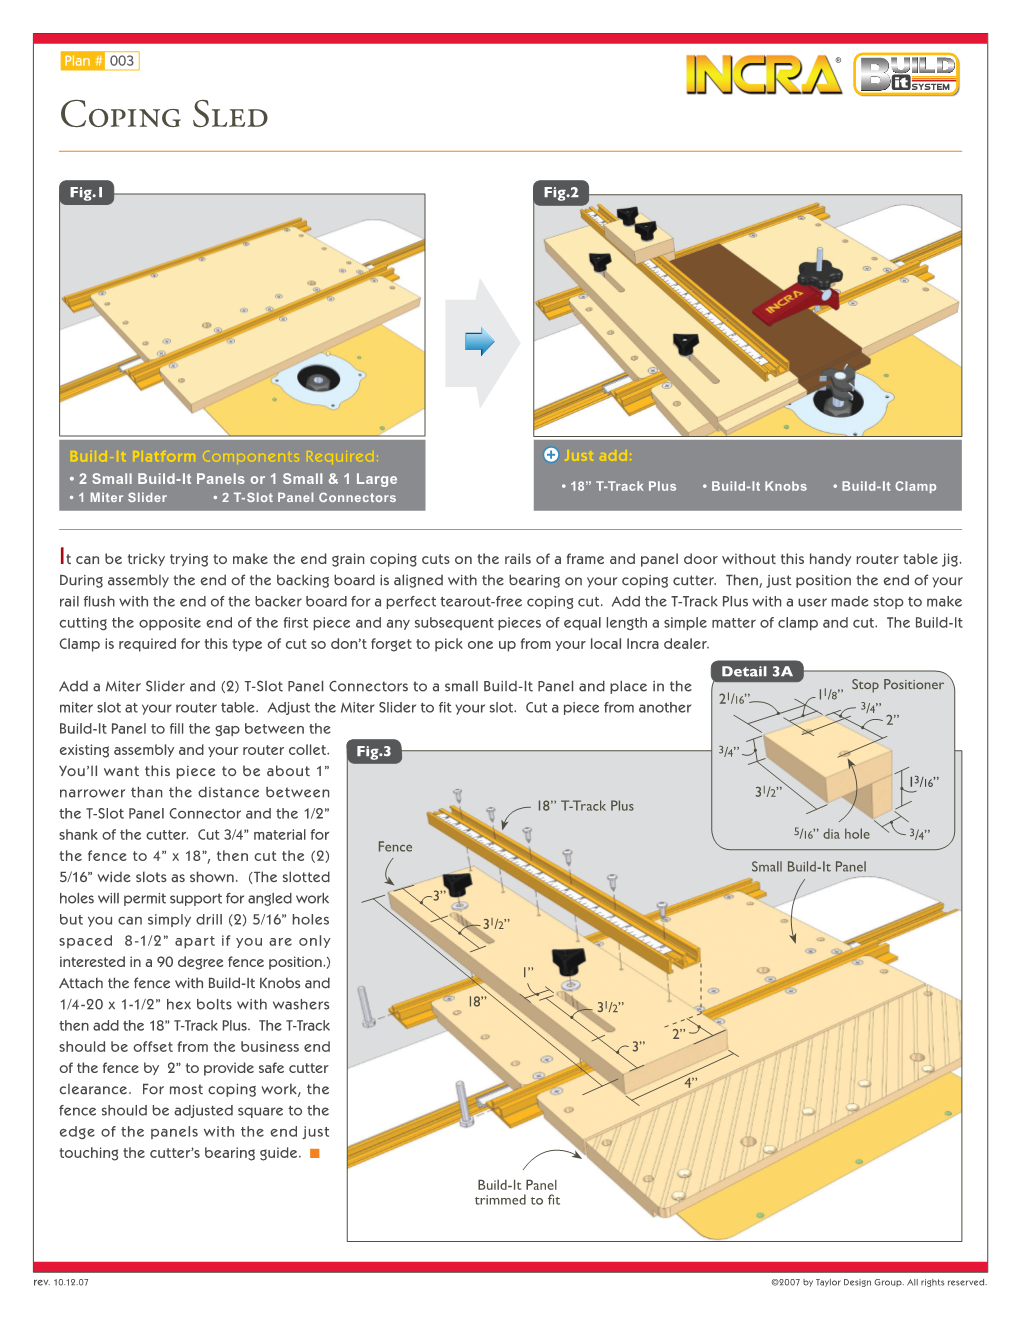 Coping Sled Jig Plan (003)